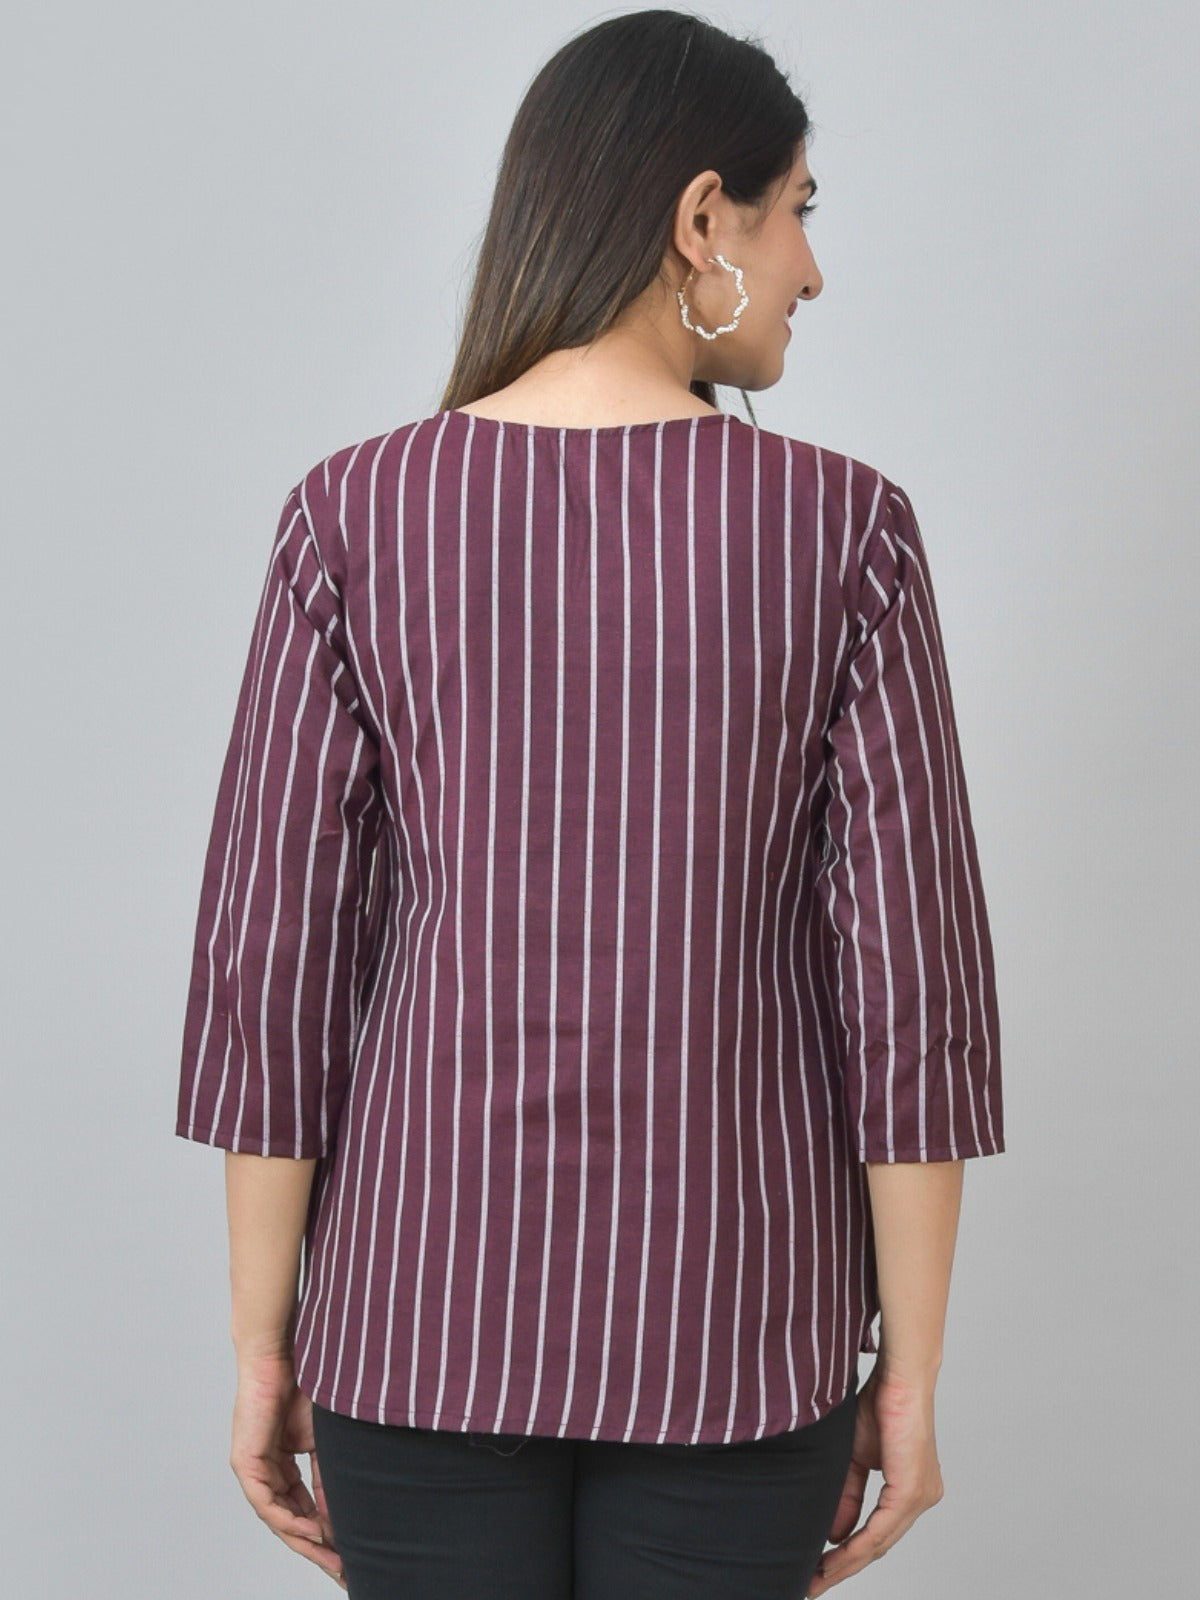 Pack Of 2 Maroon And Dark Purple Striped Cotton Womens Top Combo